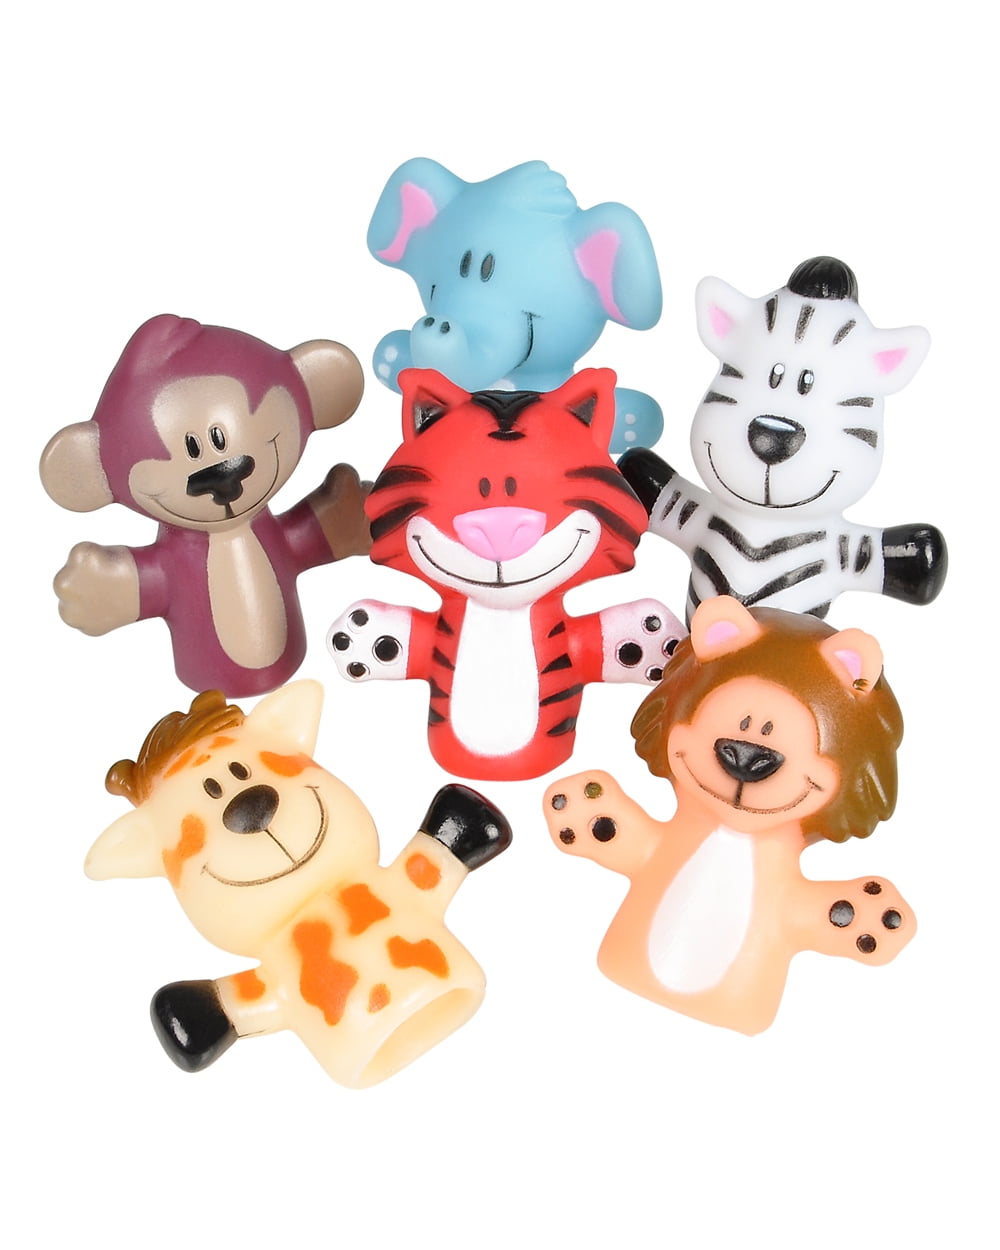 Kids Finger Puppets Plush Baby Toys Story Gaming Children Educational Toys Cute 